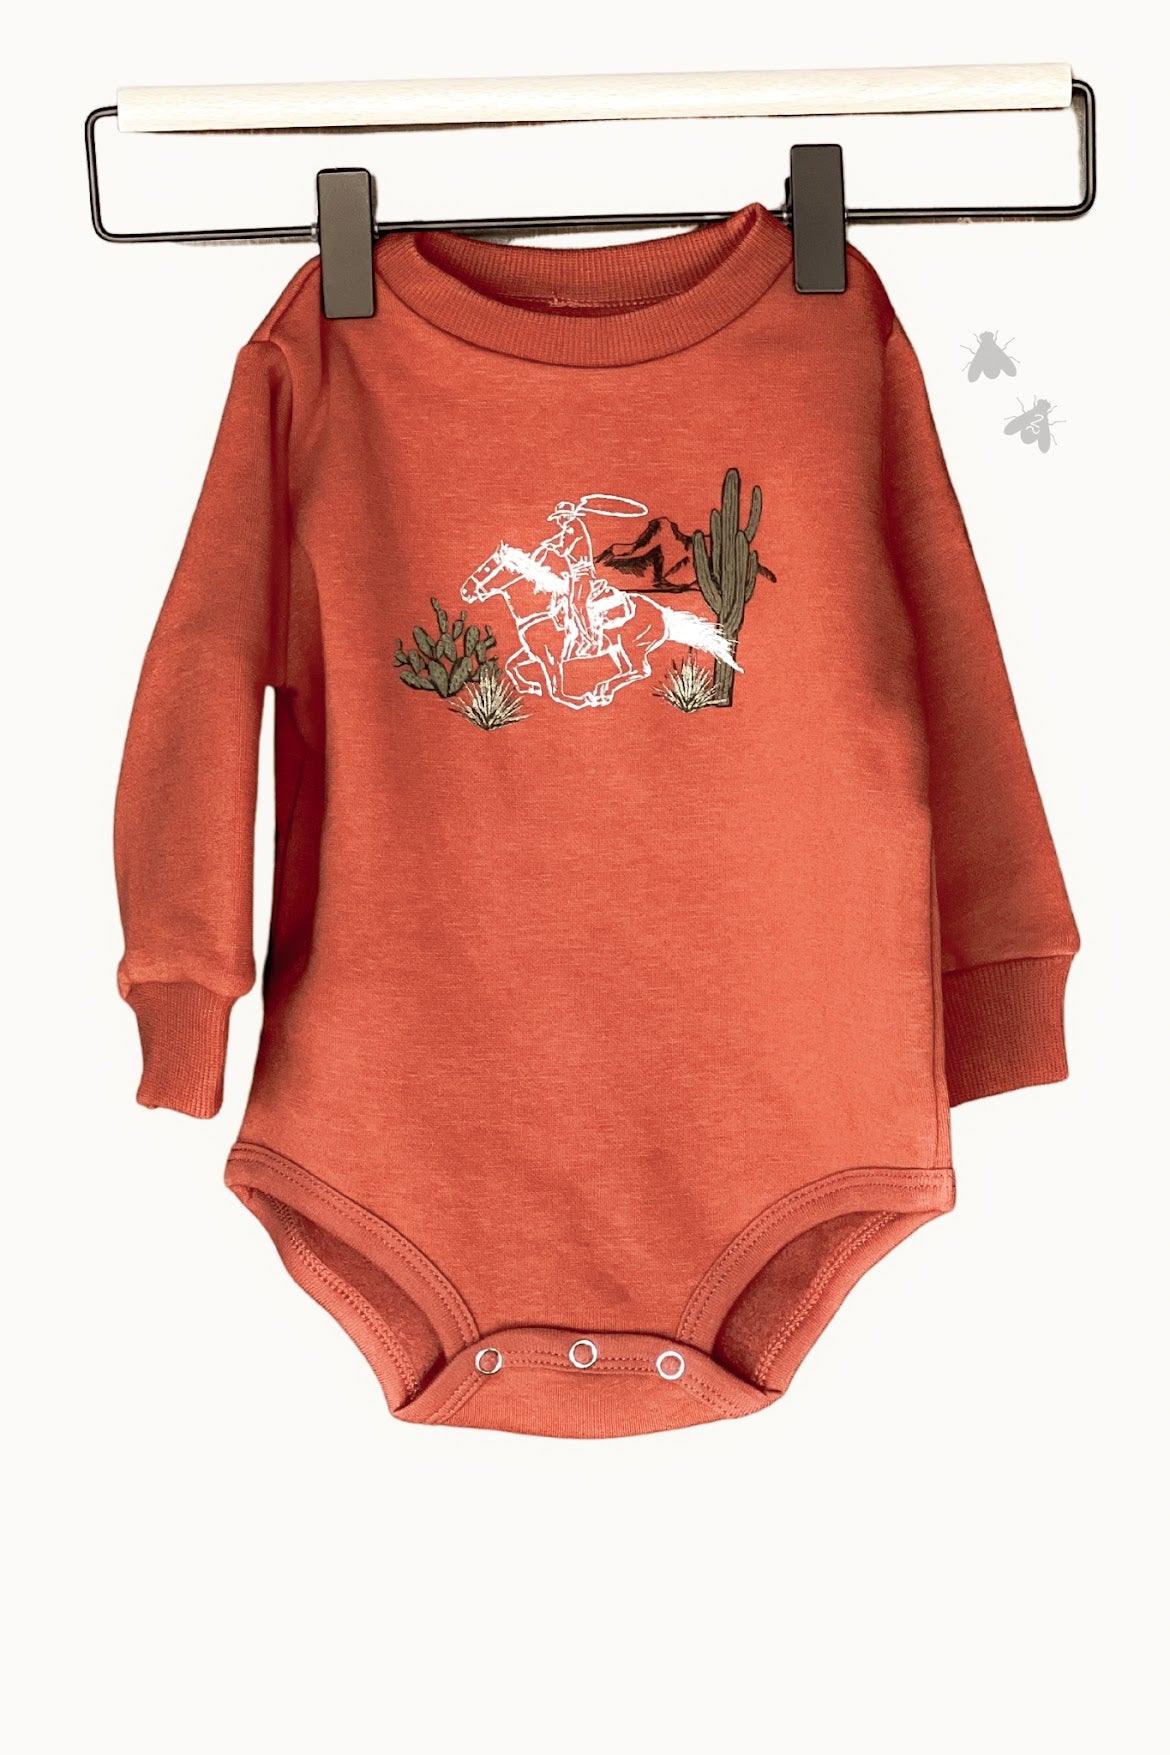 2 Fly Kid's Western Way of Life Long Sleeve One Piece, Rust-Baby & Toddlers Tops-Sunshine and Wine Boutique